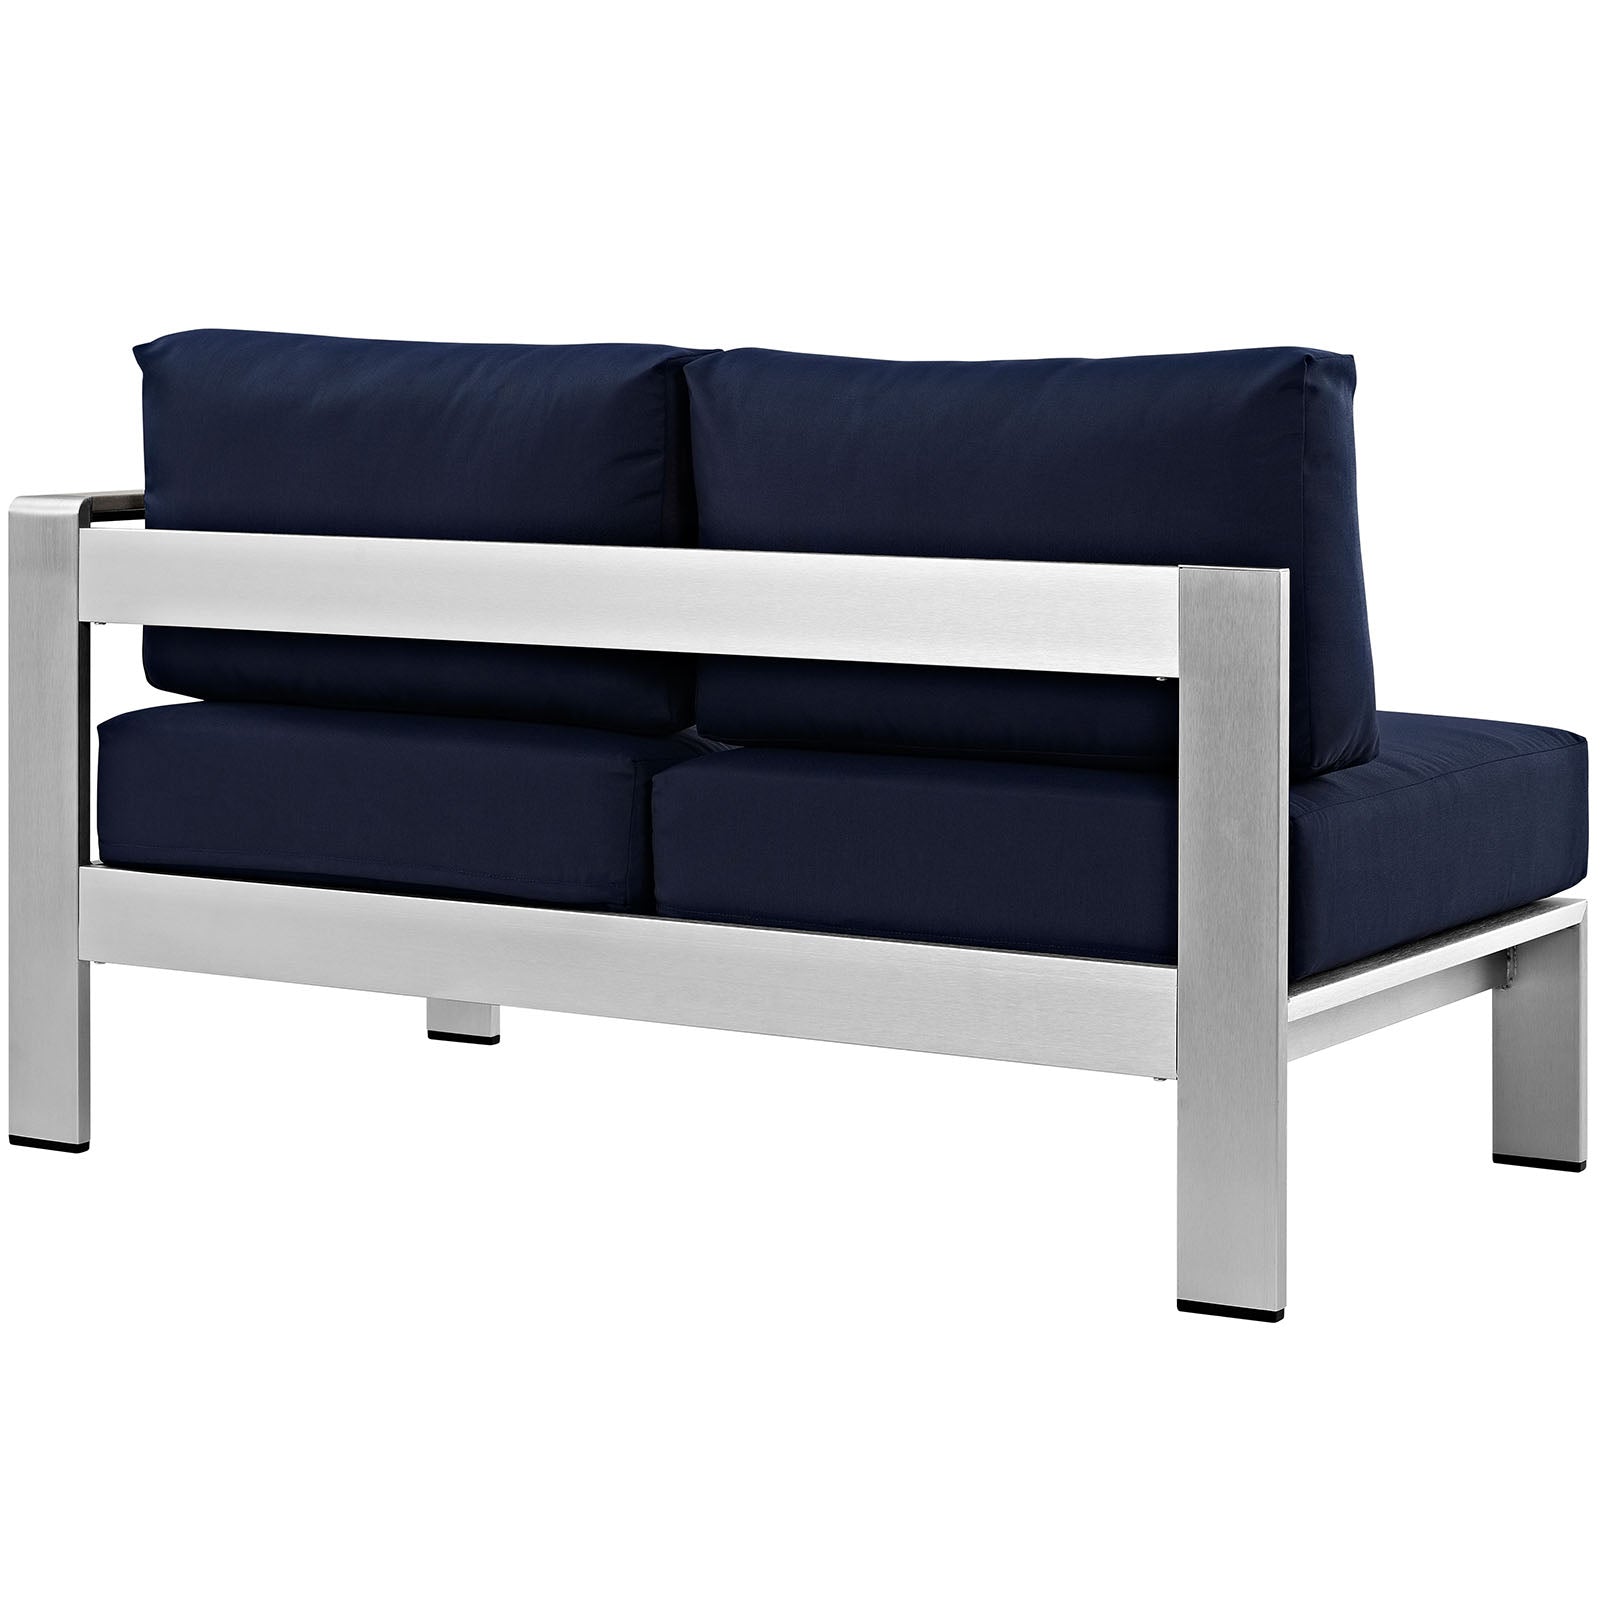 Modway Outdoor Sofas - Shore Right-Arm Corner Sectional Outdoor Patio Aluminum Loveseat Silver Navy